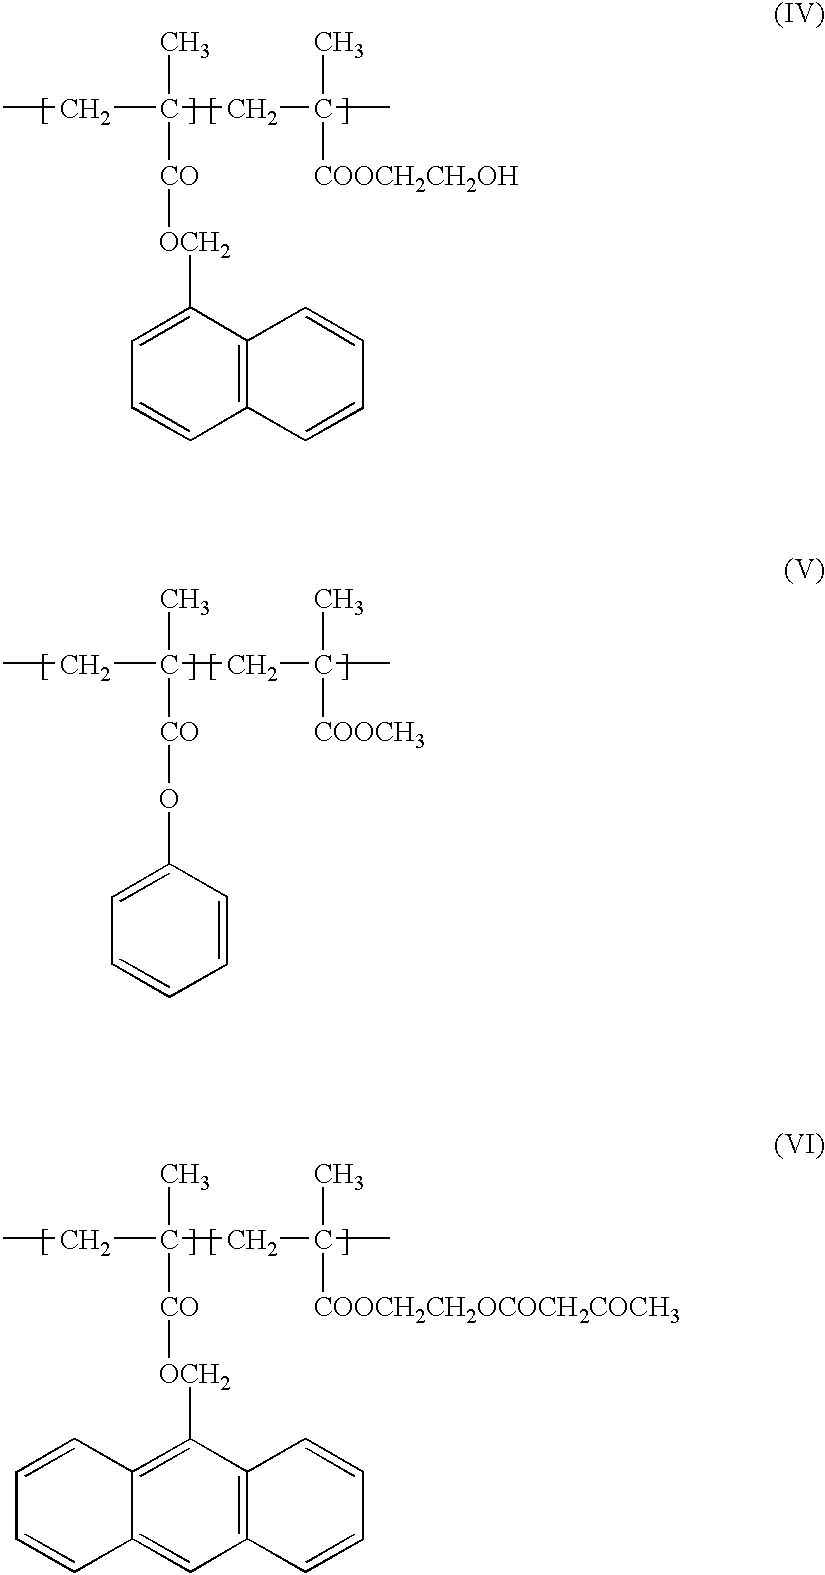 Blocked isocyanate compound-containing composition for forming a radiation absorbing coating and anti-reflective coating formed therefrom